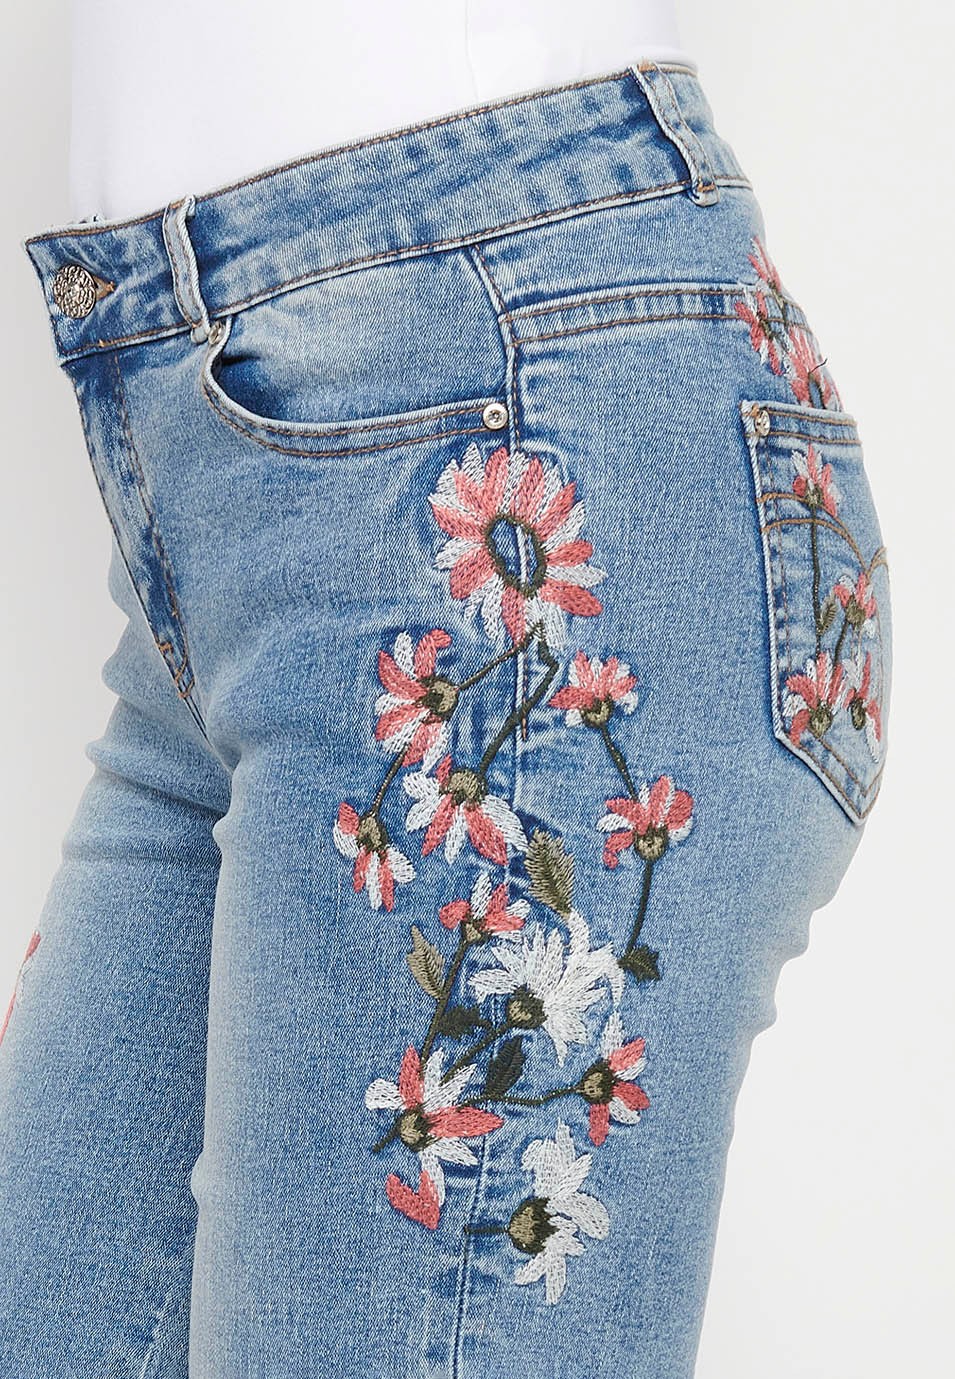 Shorts with floral embroidery, blue color for women